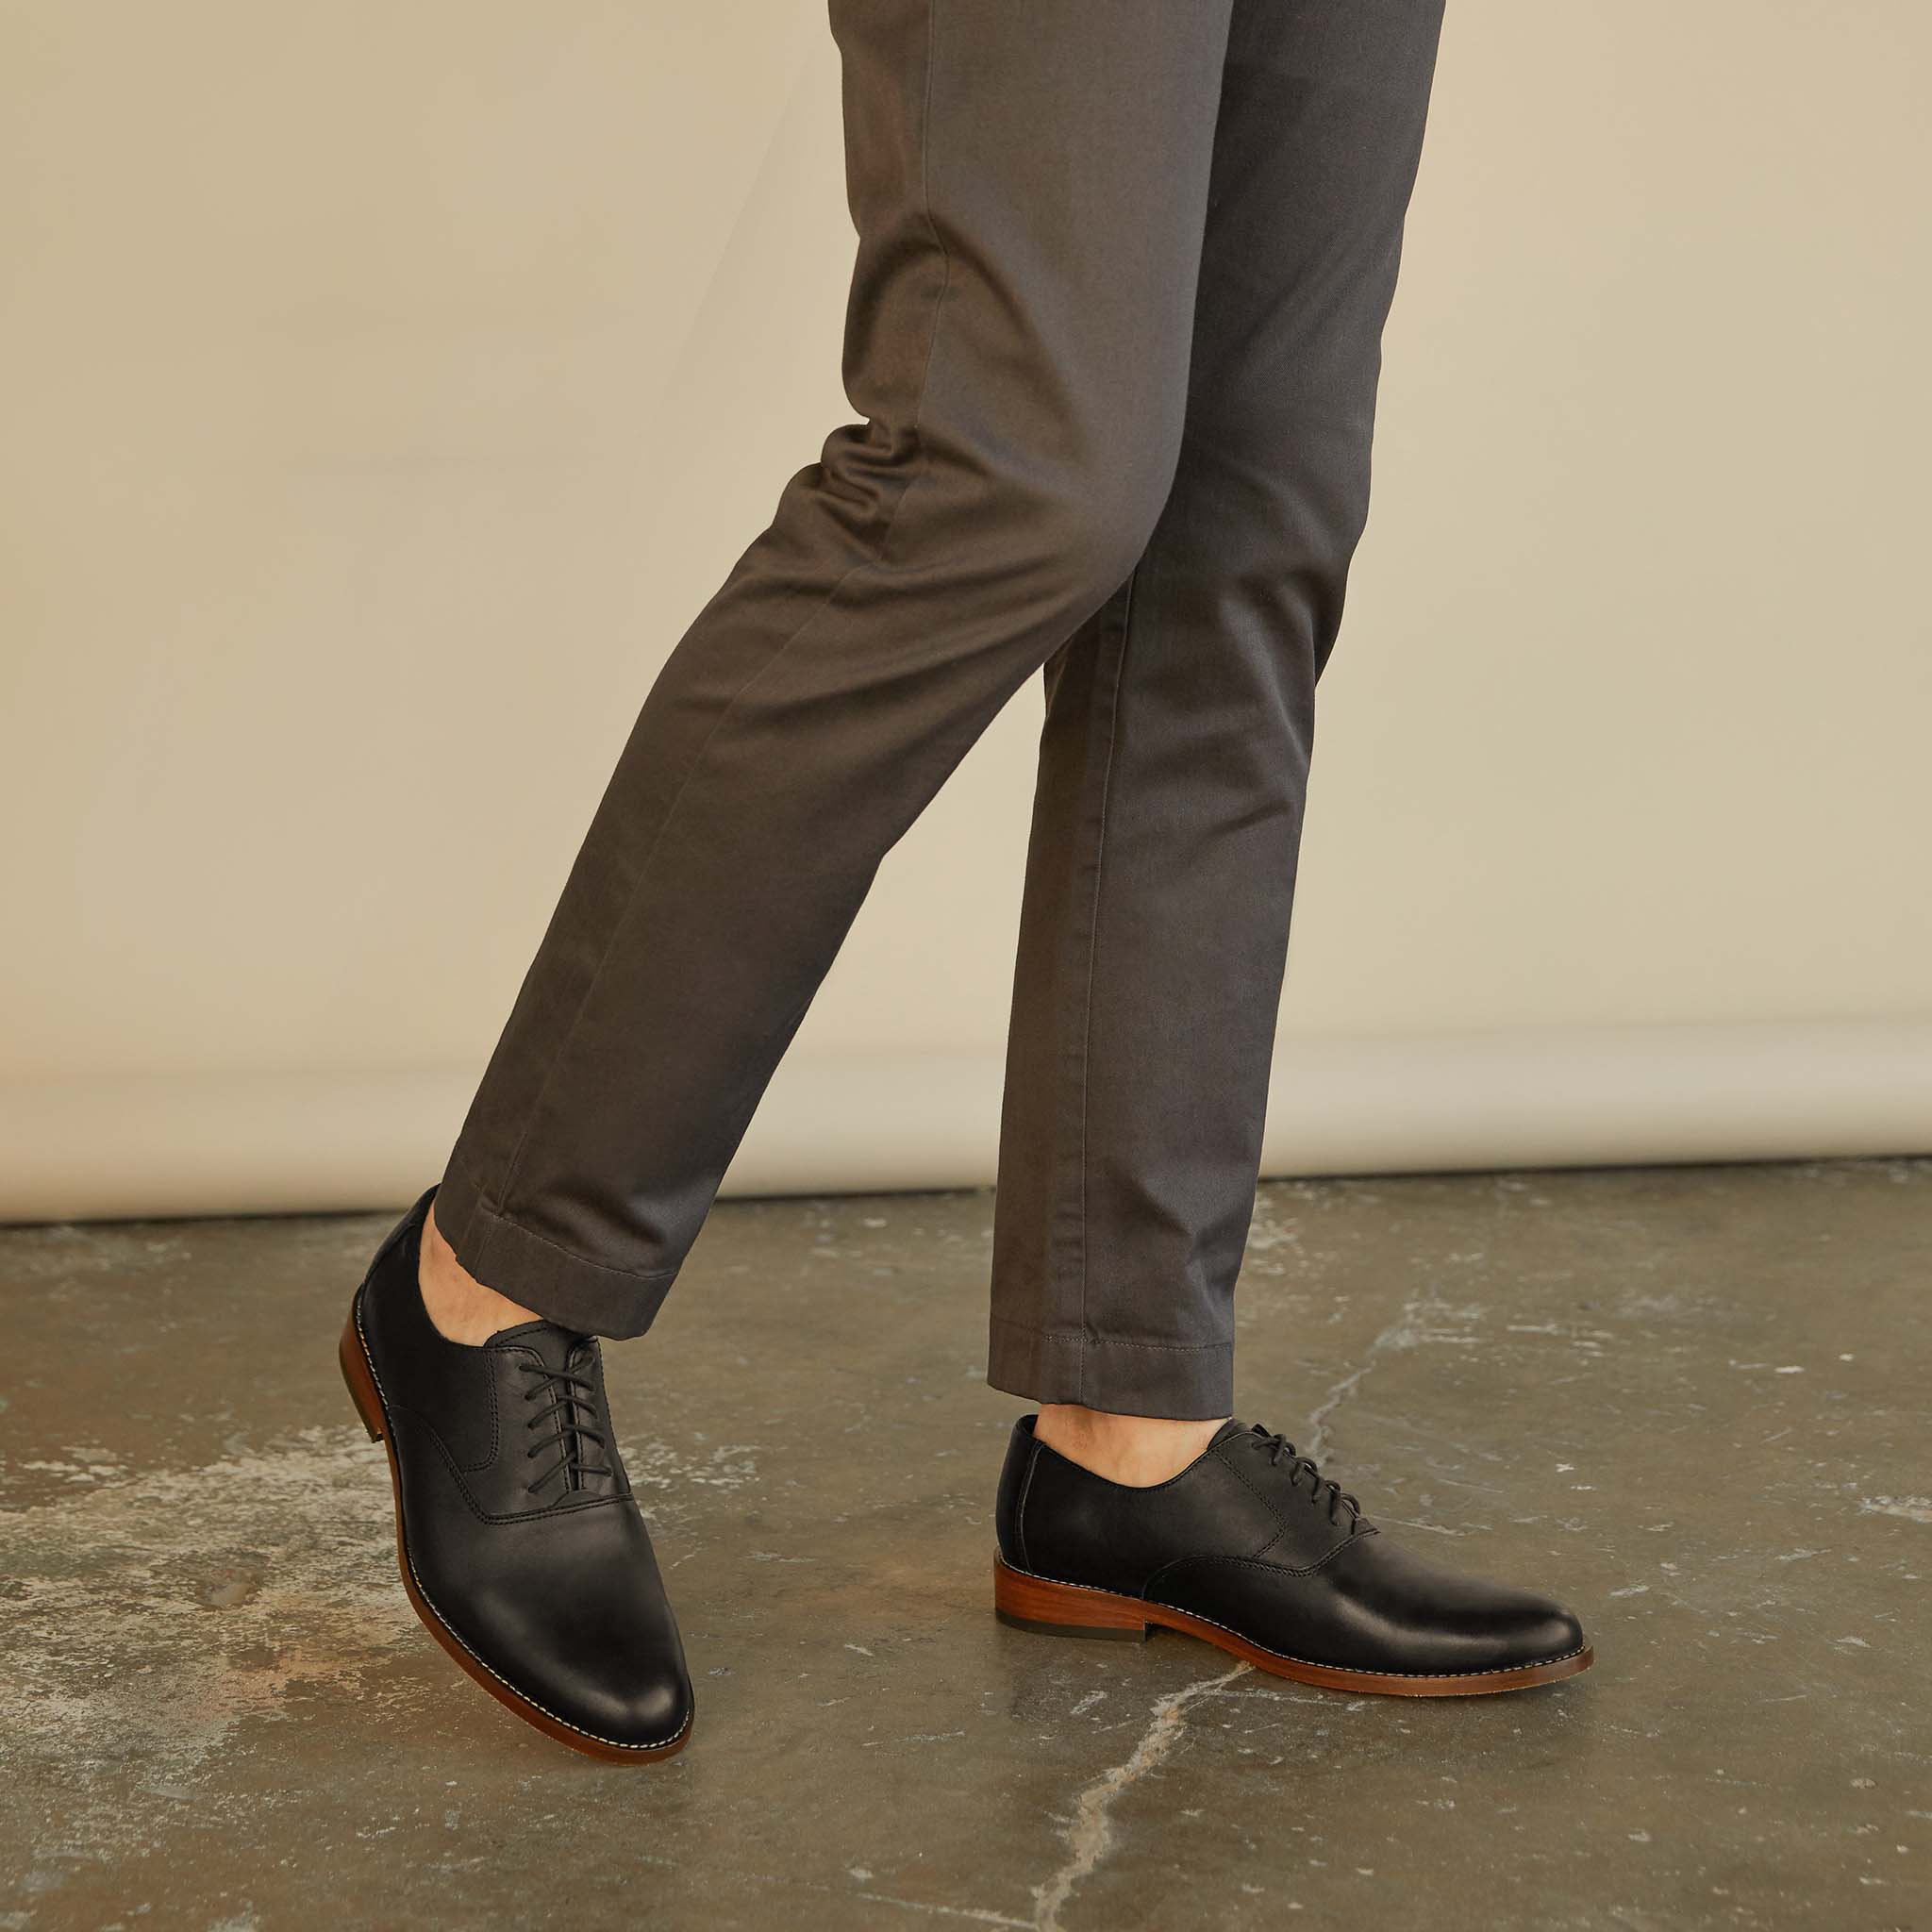 Image 2 of the Everyday Oxford Black on model